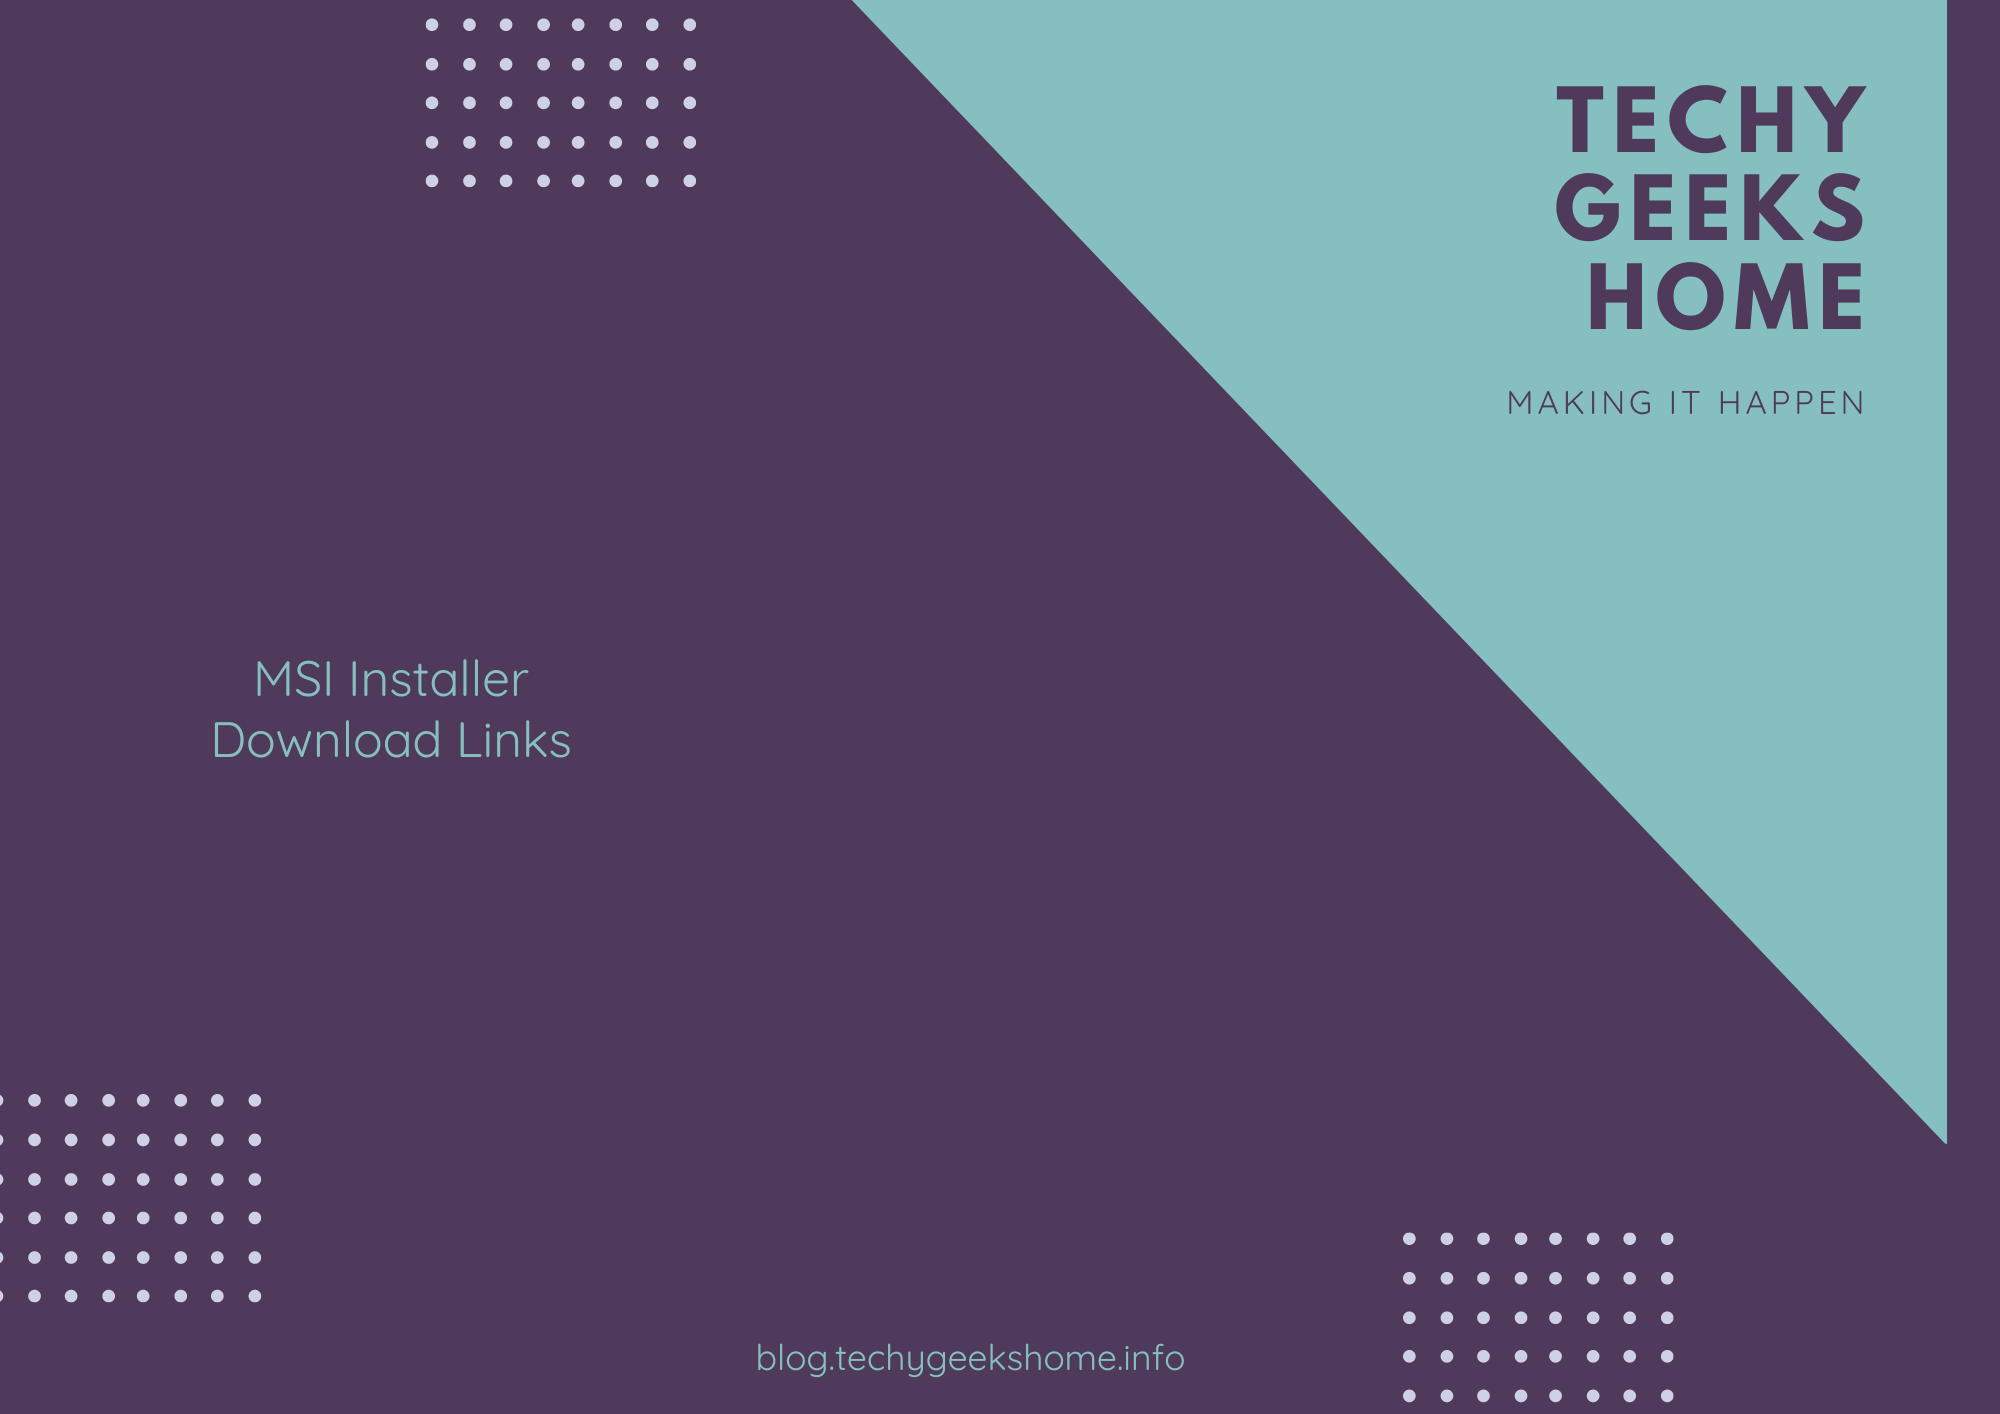 A graphic featuring a split background with dark purple and teal, titled "techy geeks home" at the top and "msi download drivers" in the center. The website URL is at the